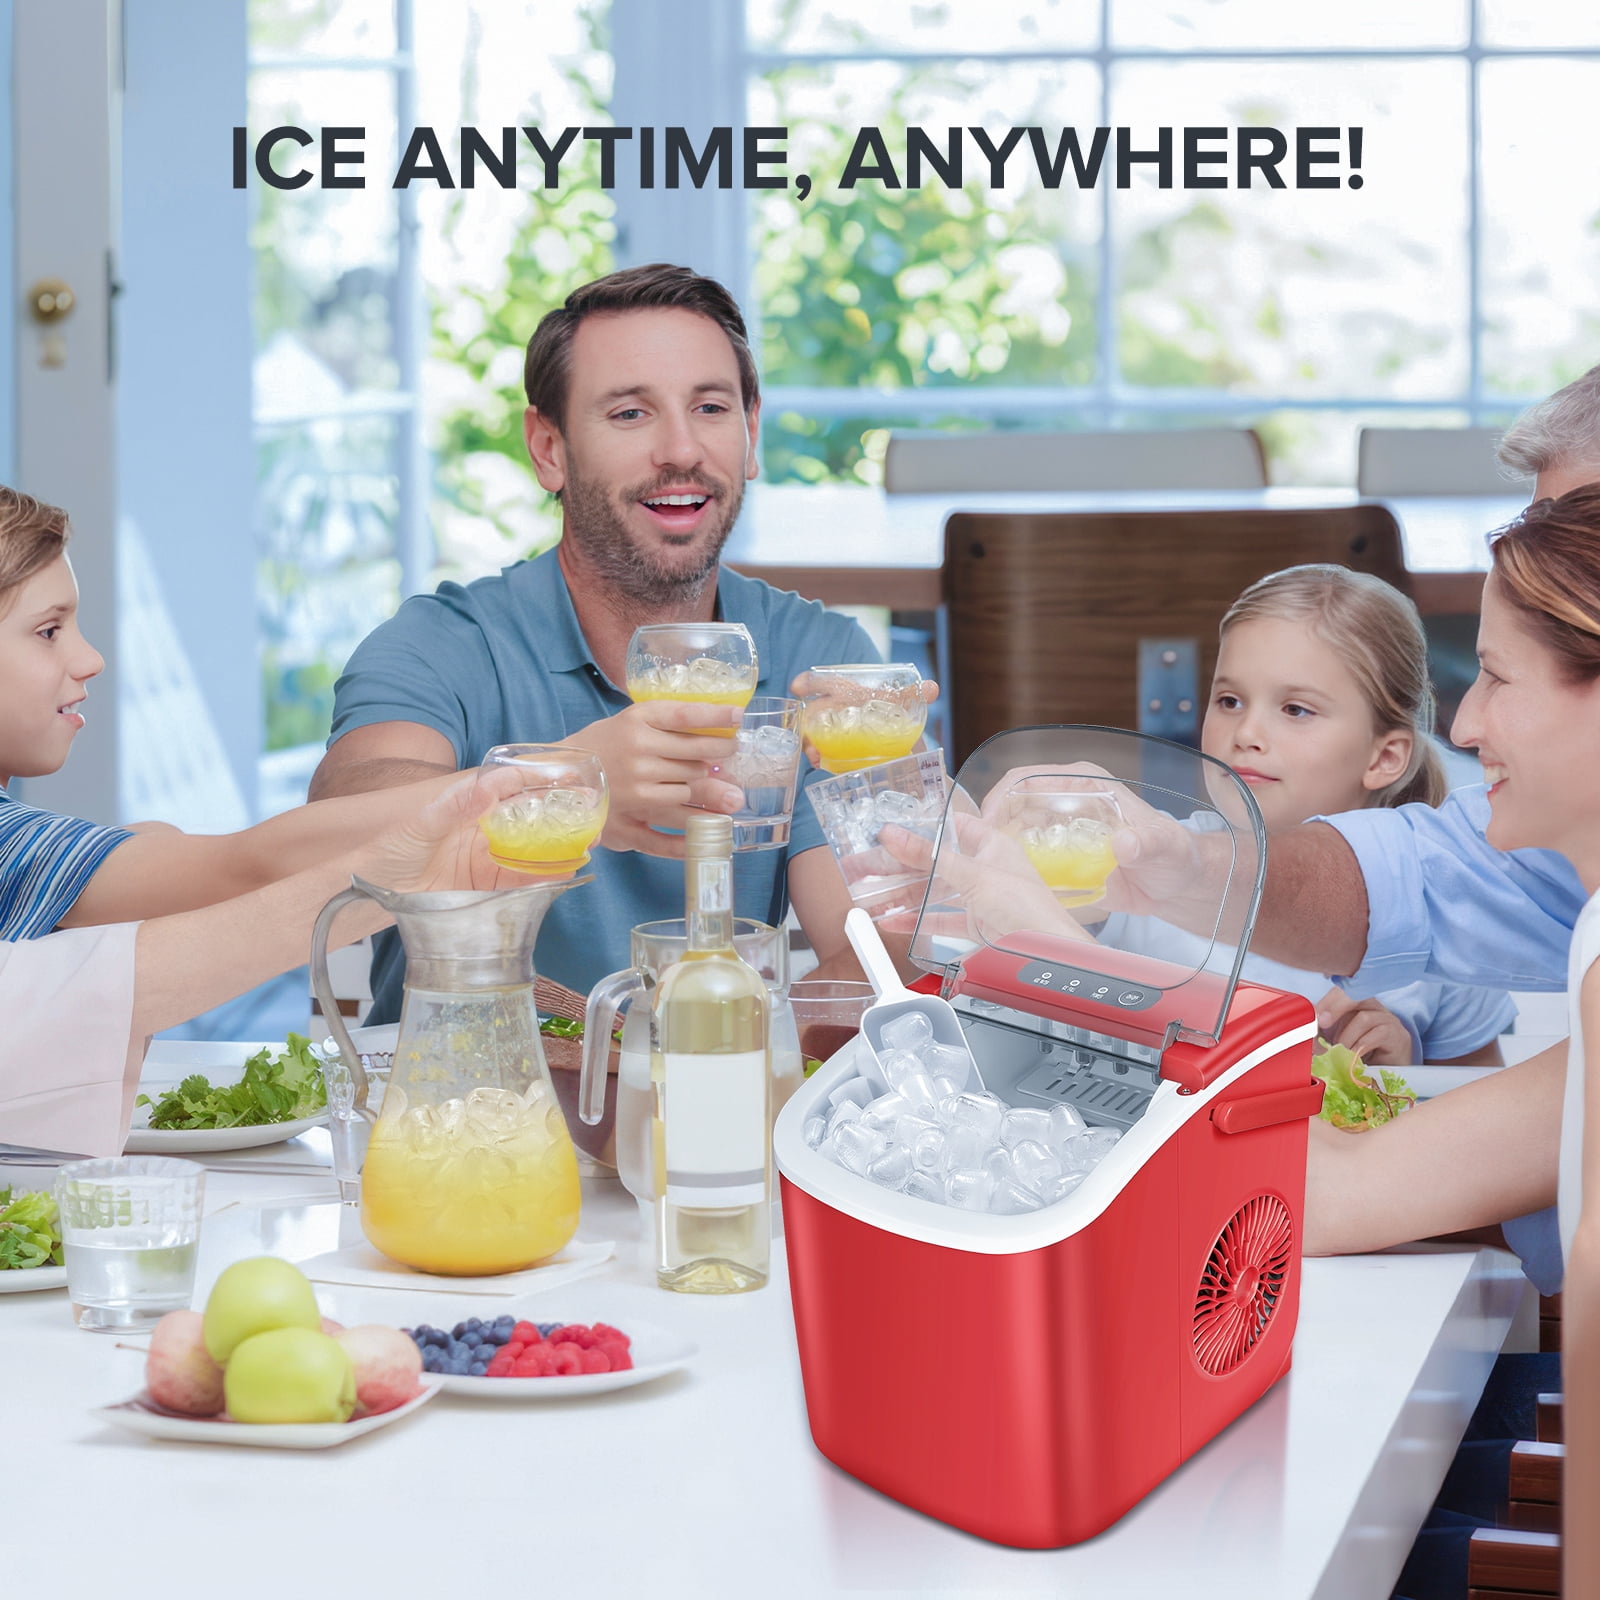 KISSAIR Portable Ice Maker Countertop, 9Pcs/8Mins, 26lbs/24H, Self-Cleaning  Ice Machine with Handle for Kitchen/Office/Bar/Party, White